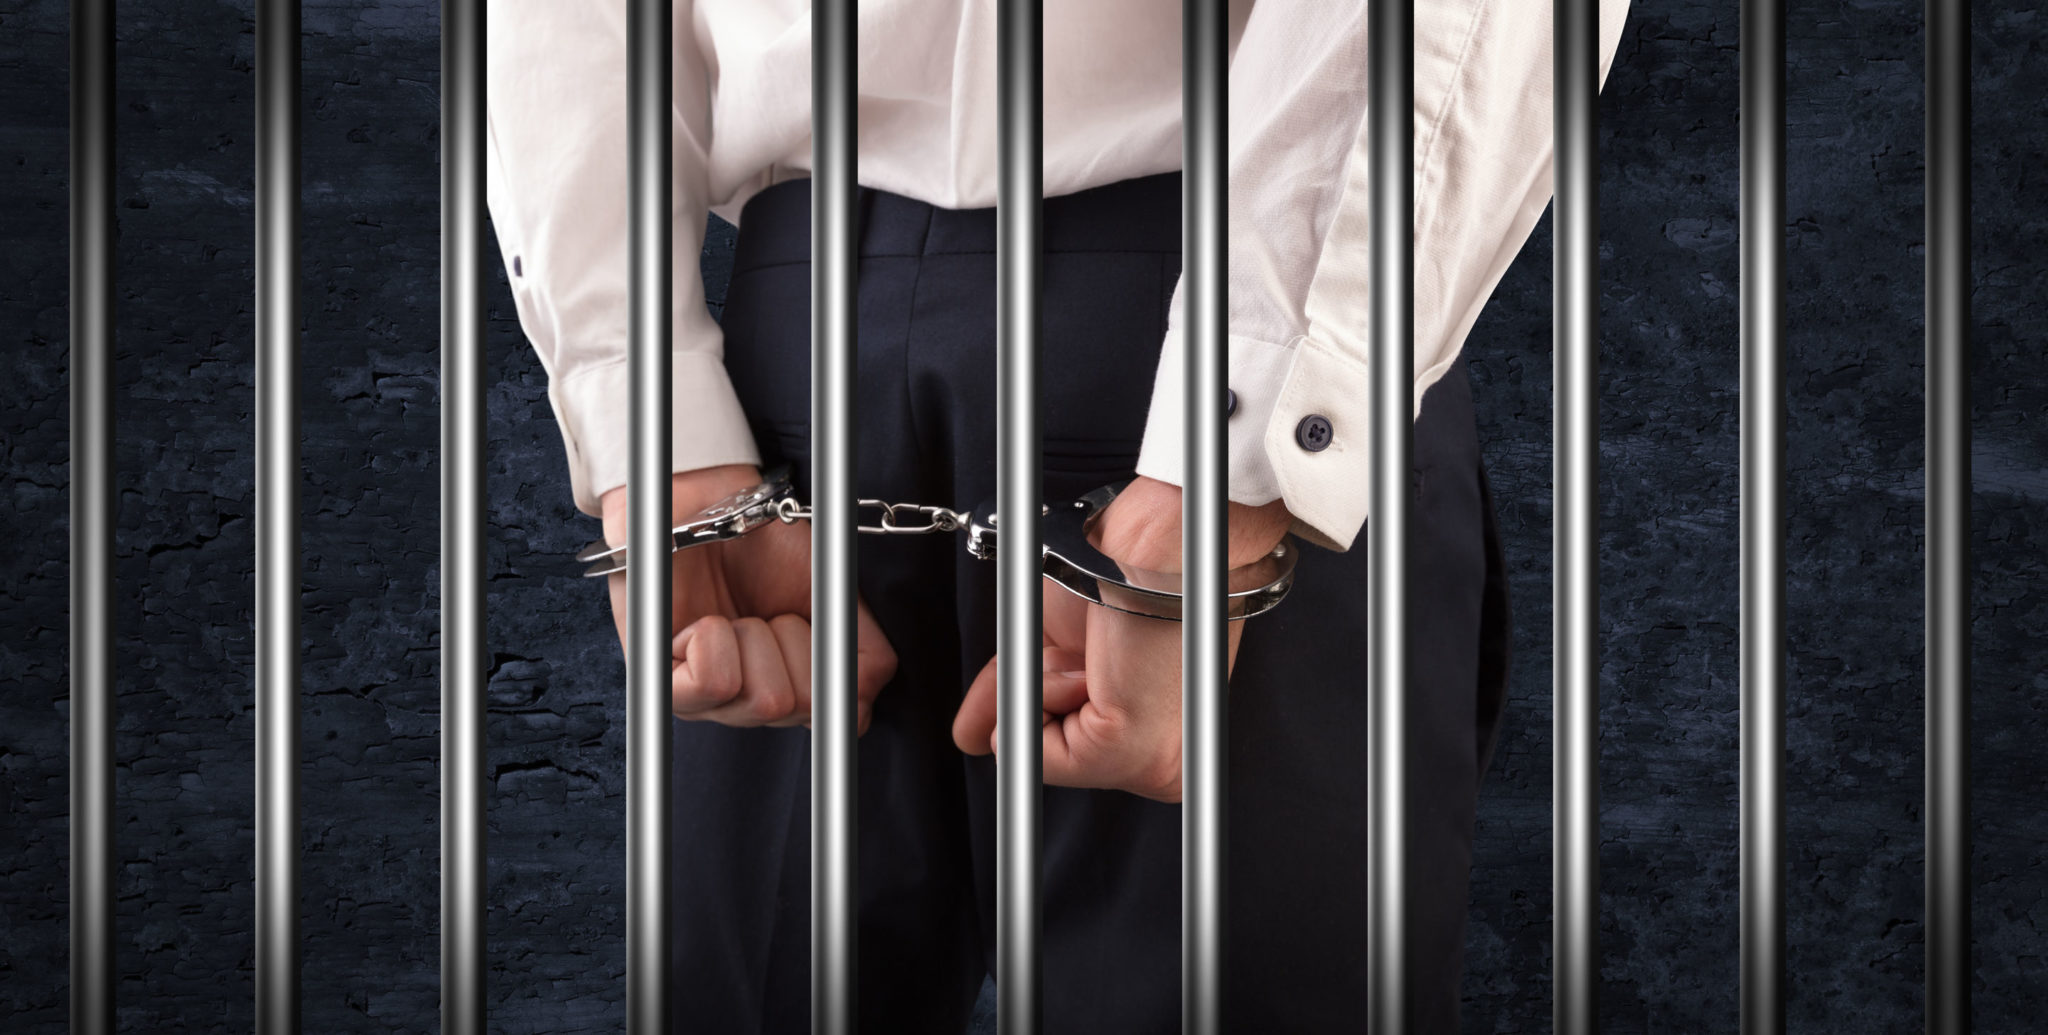 Penalties When Convicted of Involuntary Servitude Crimes in IL